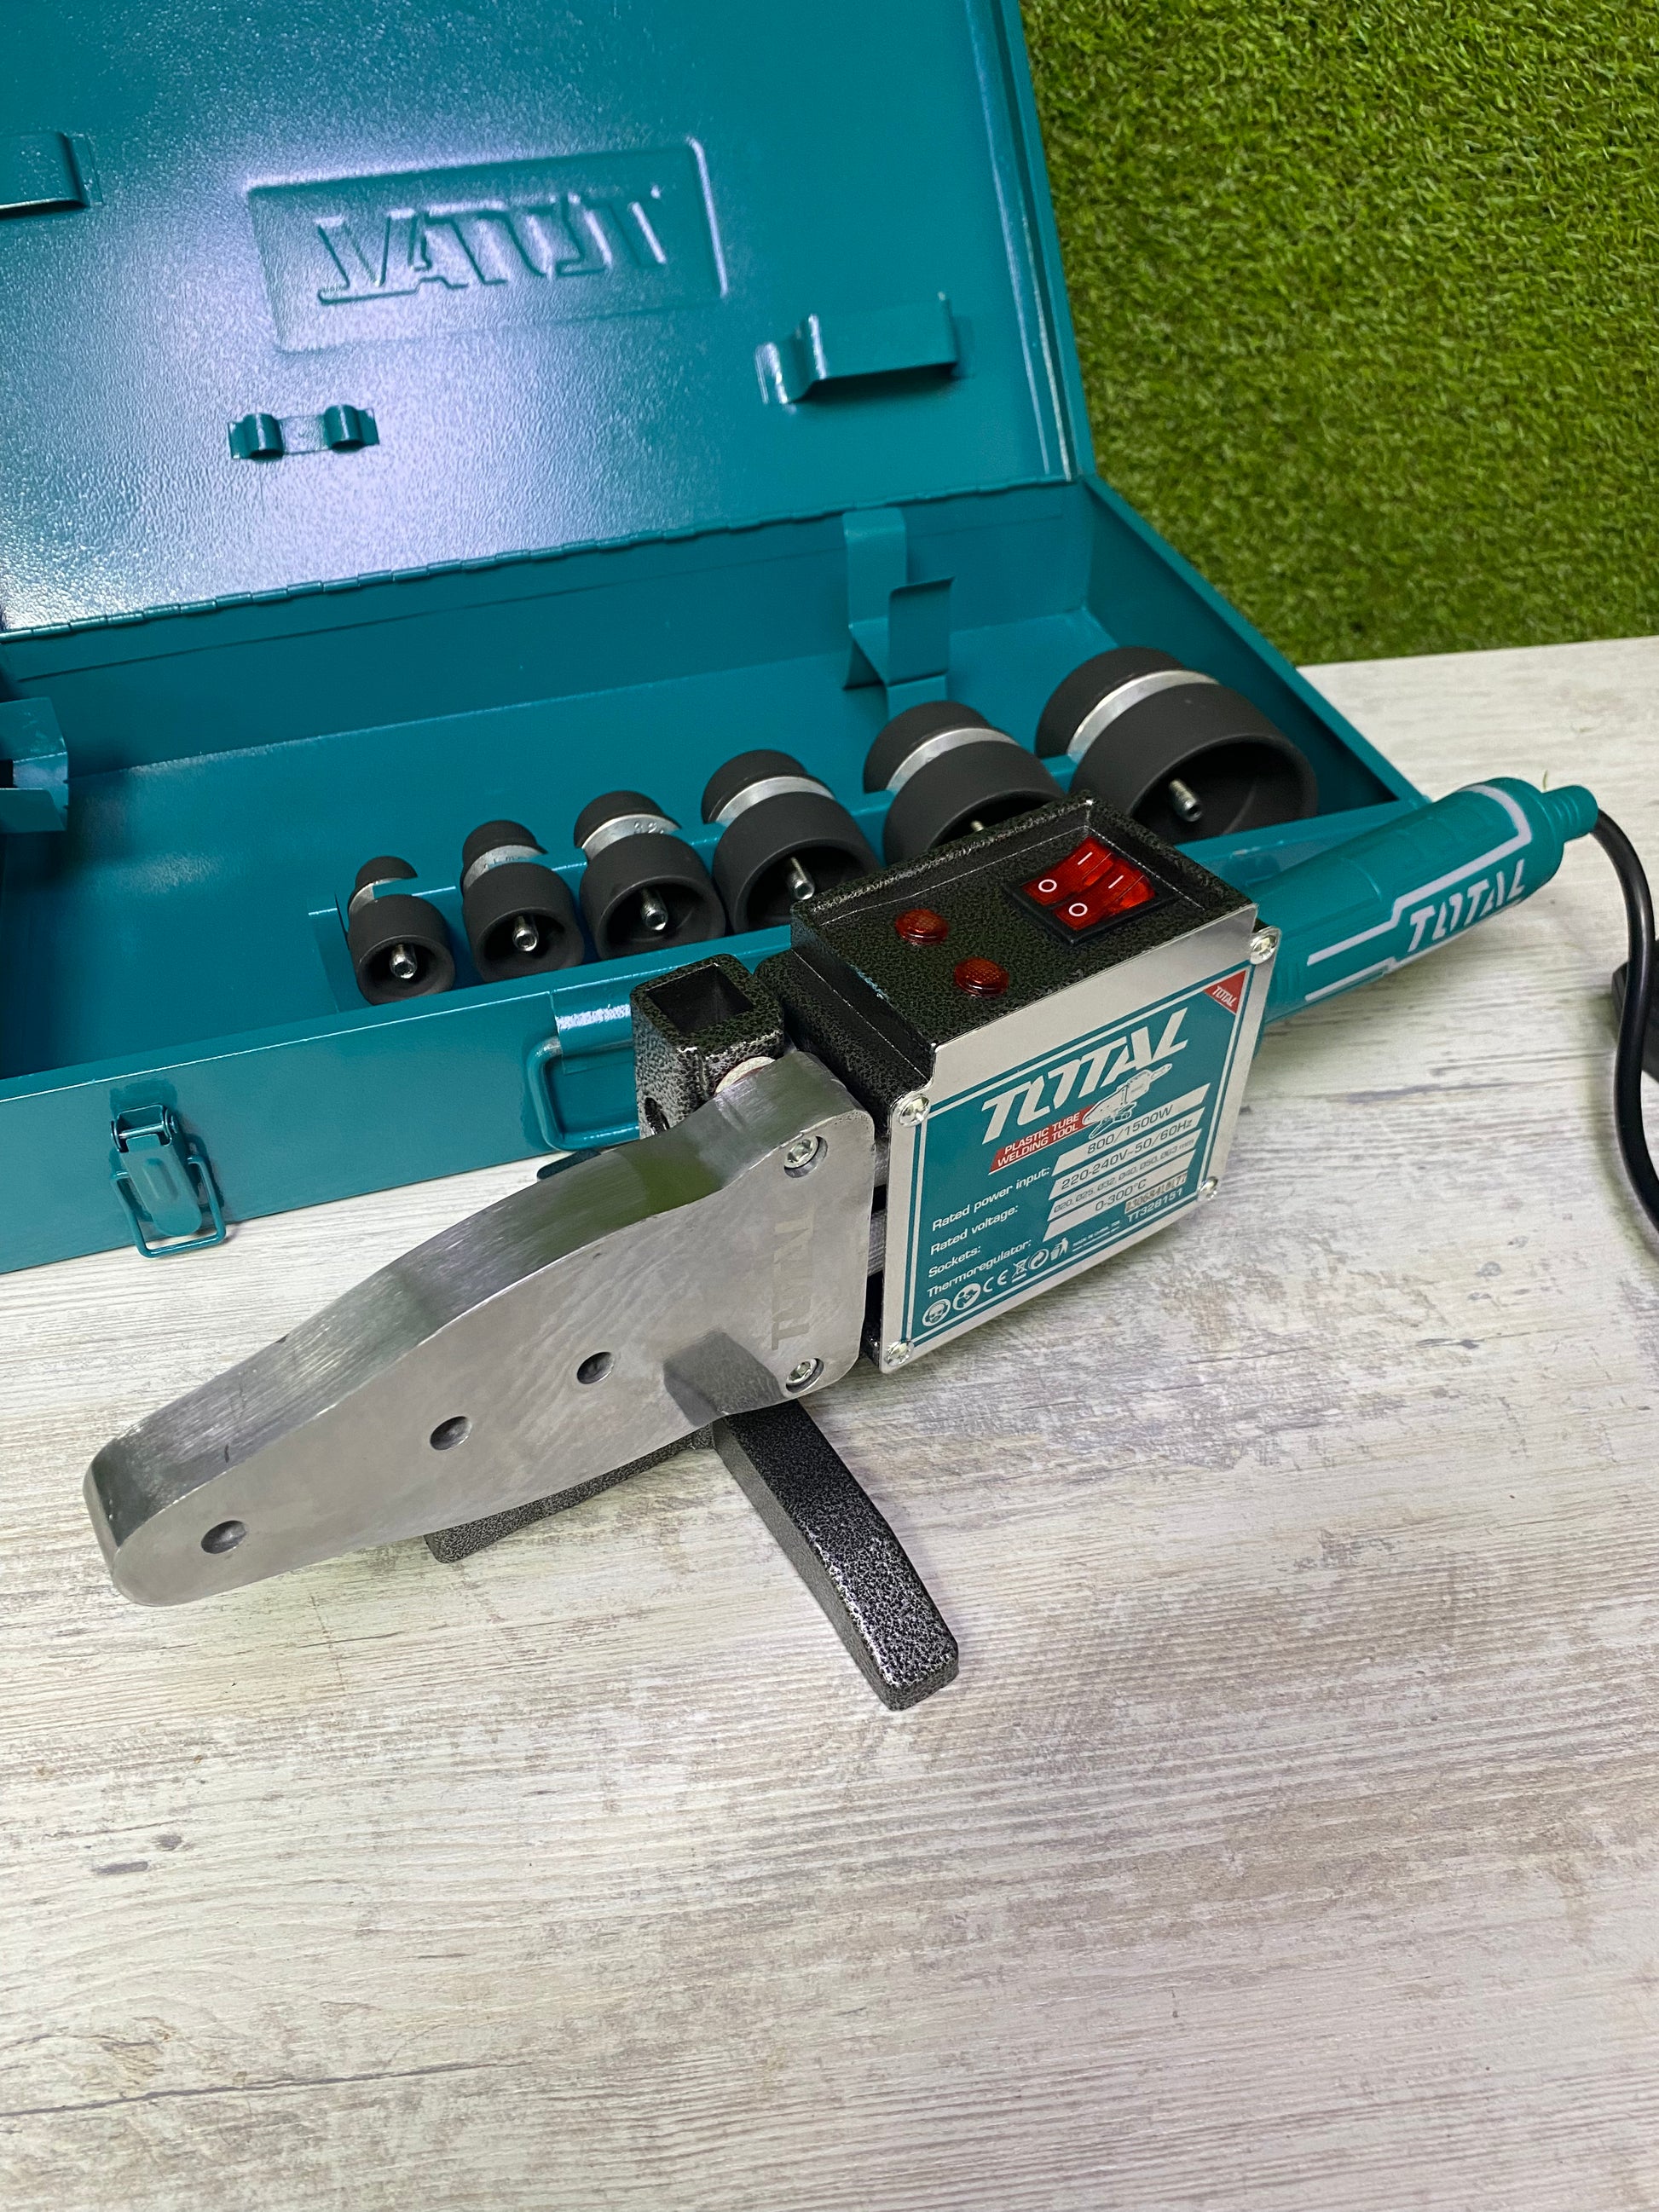 Pipe soldering machine TOTAL 800/500W